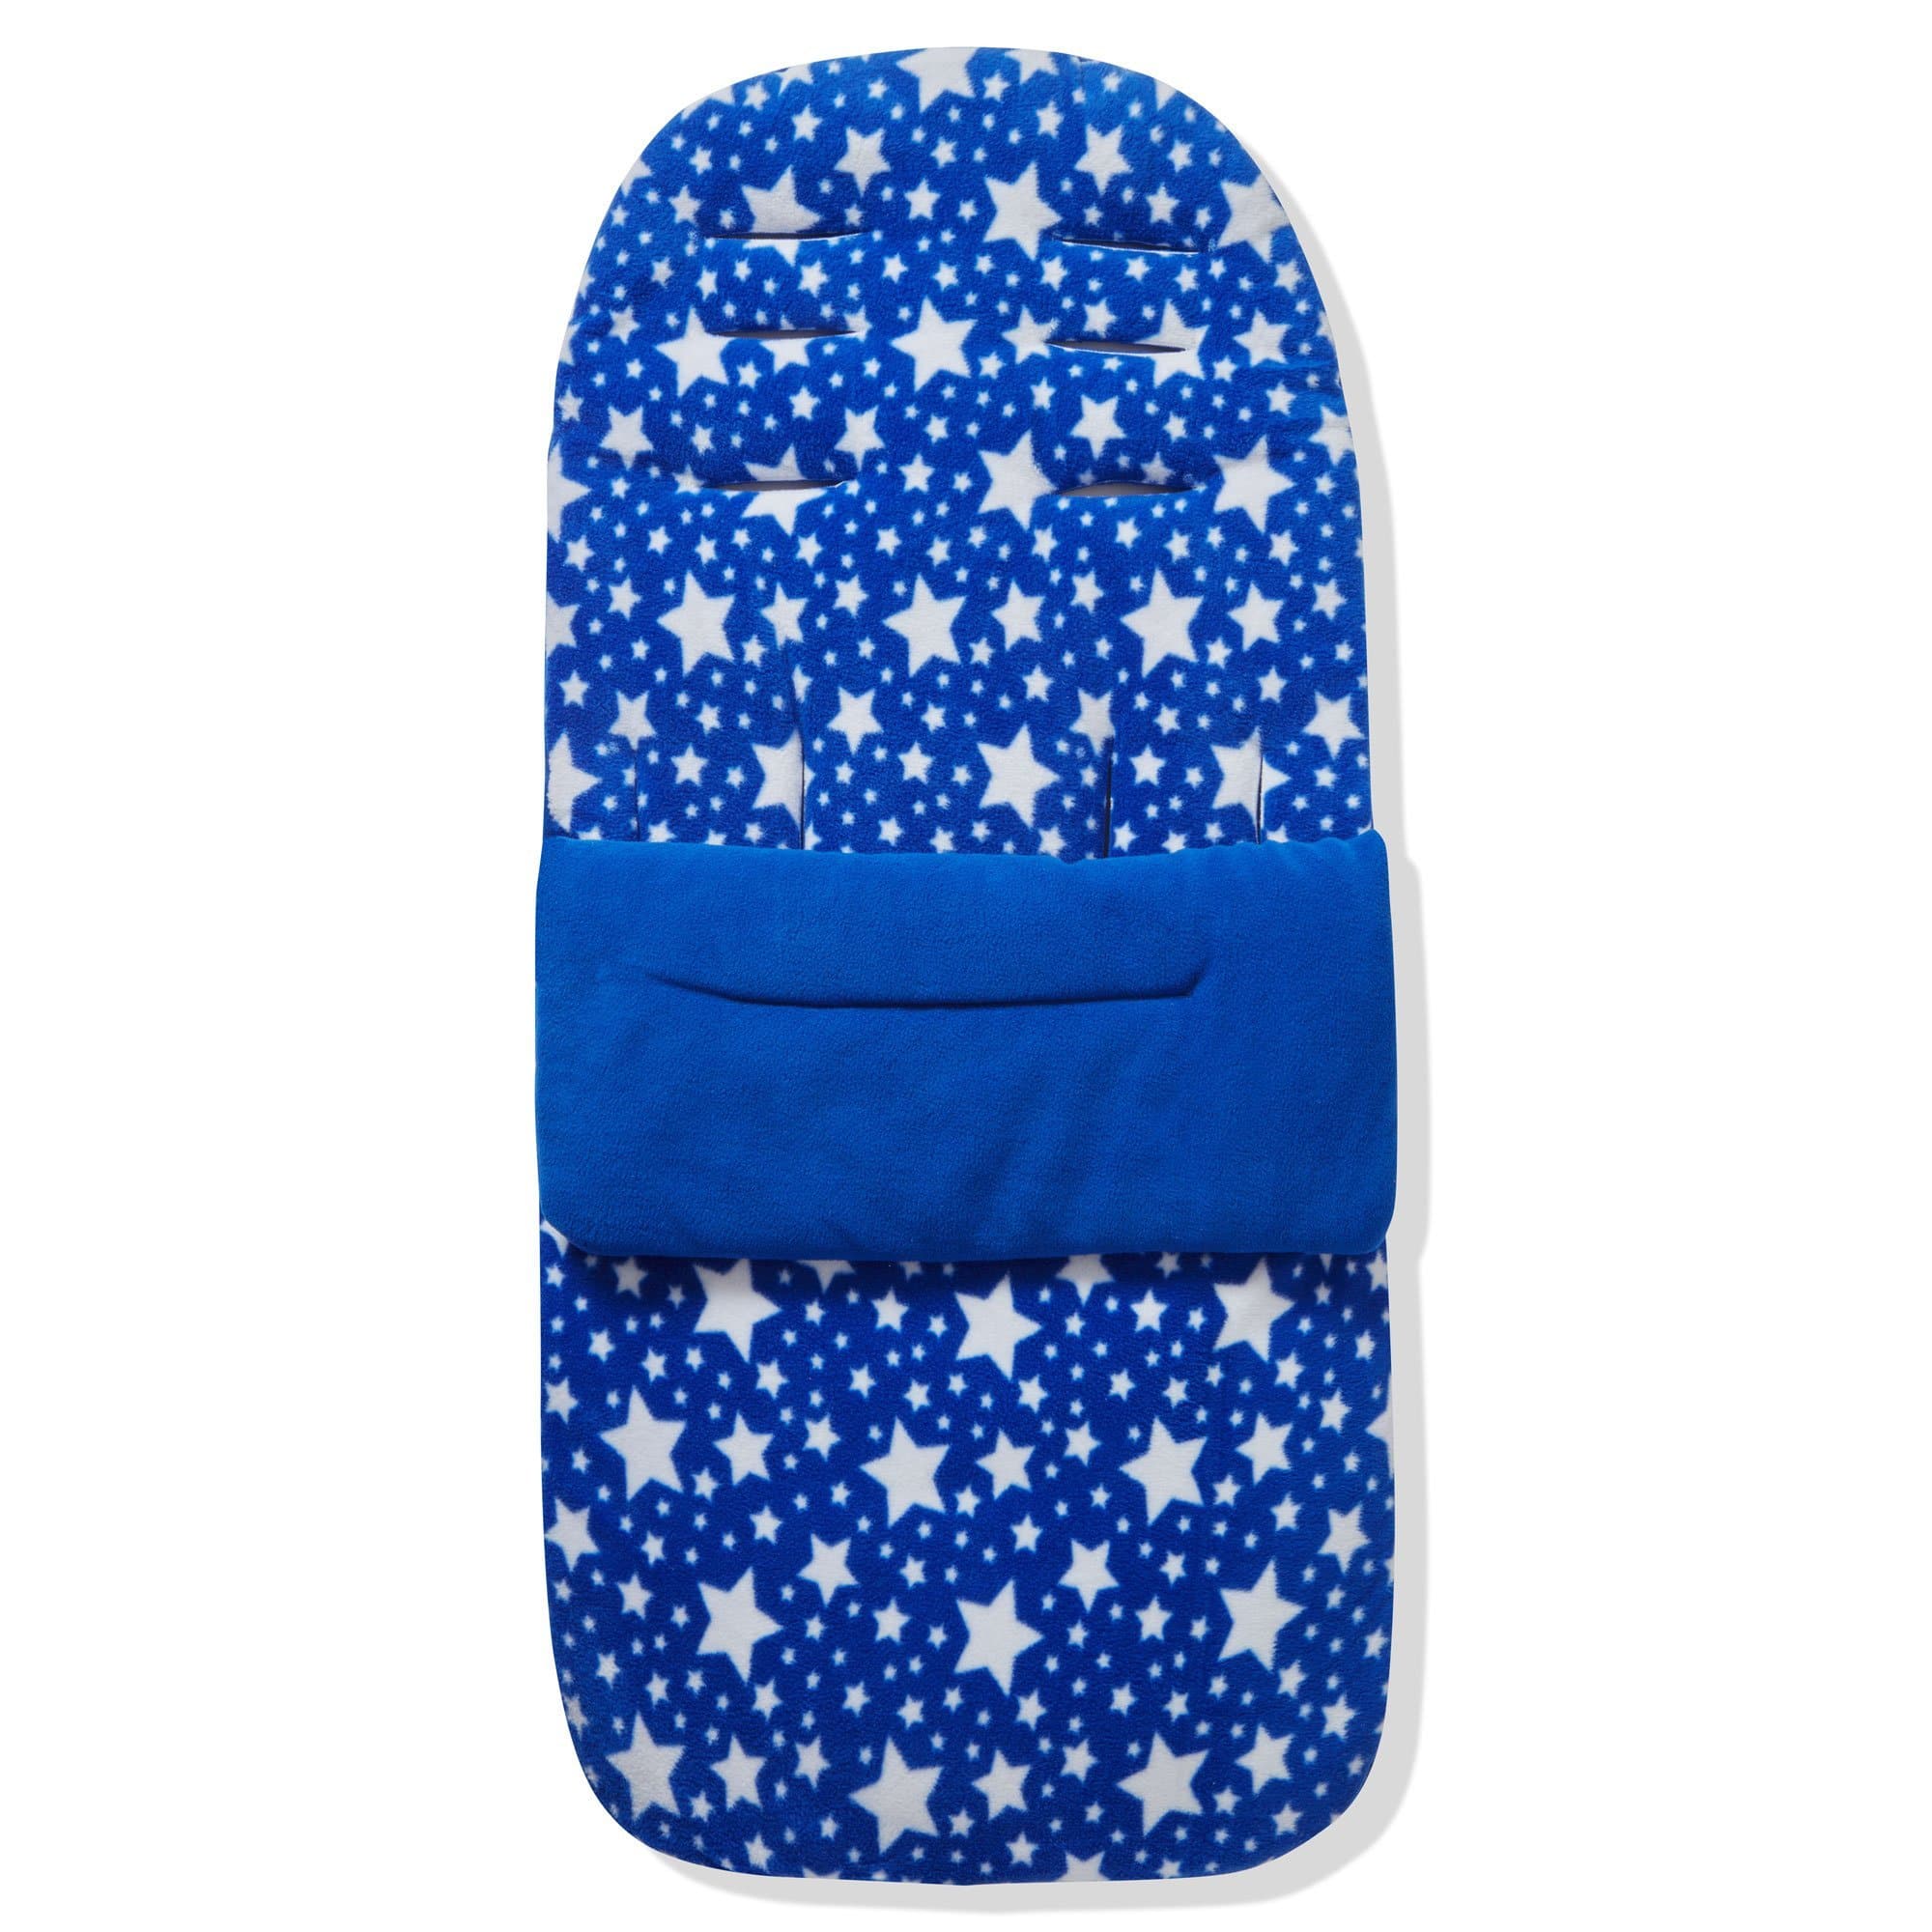 Fleece Footmuff / Cosy Toes Compatible with Joie - Blue Star / Fits All Models | For Your Little One